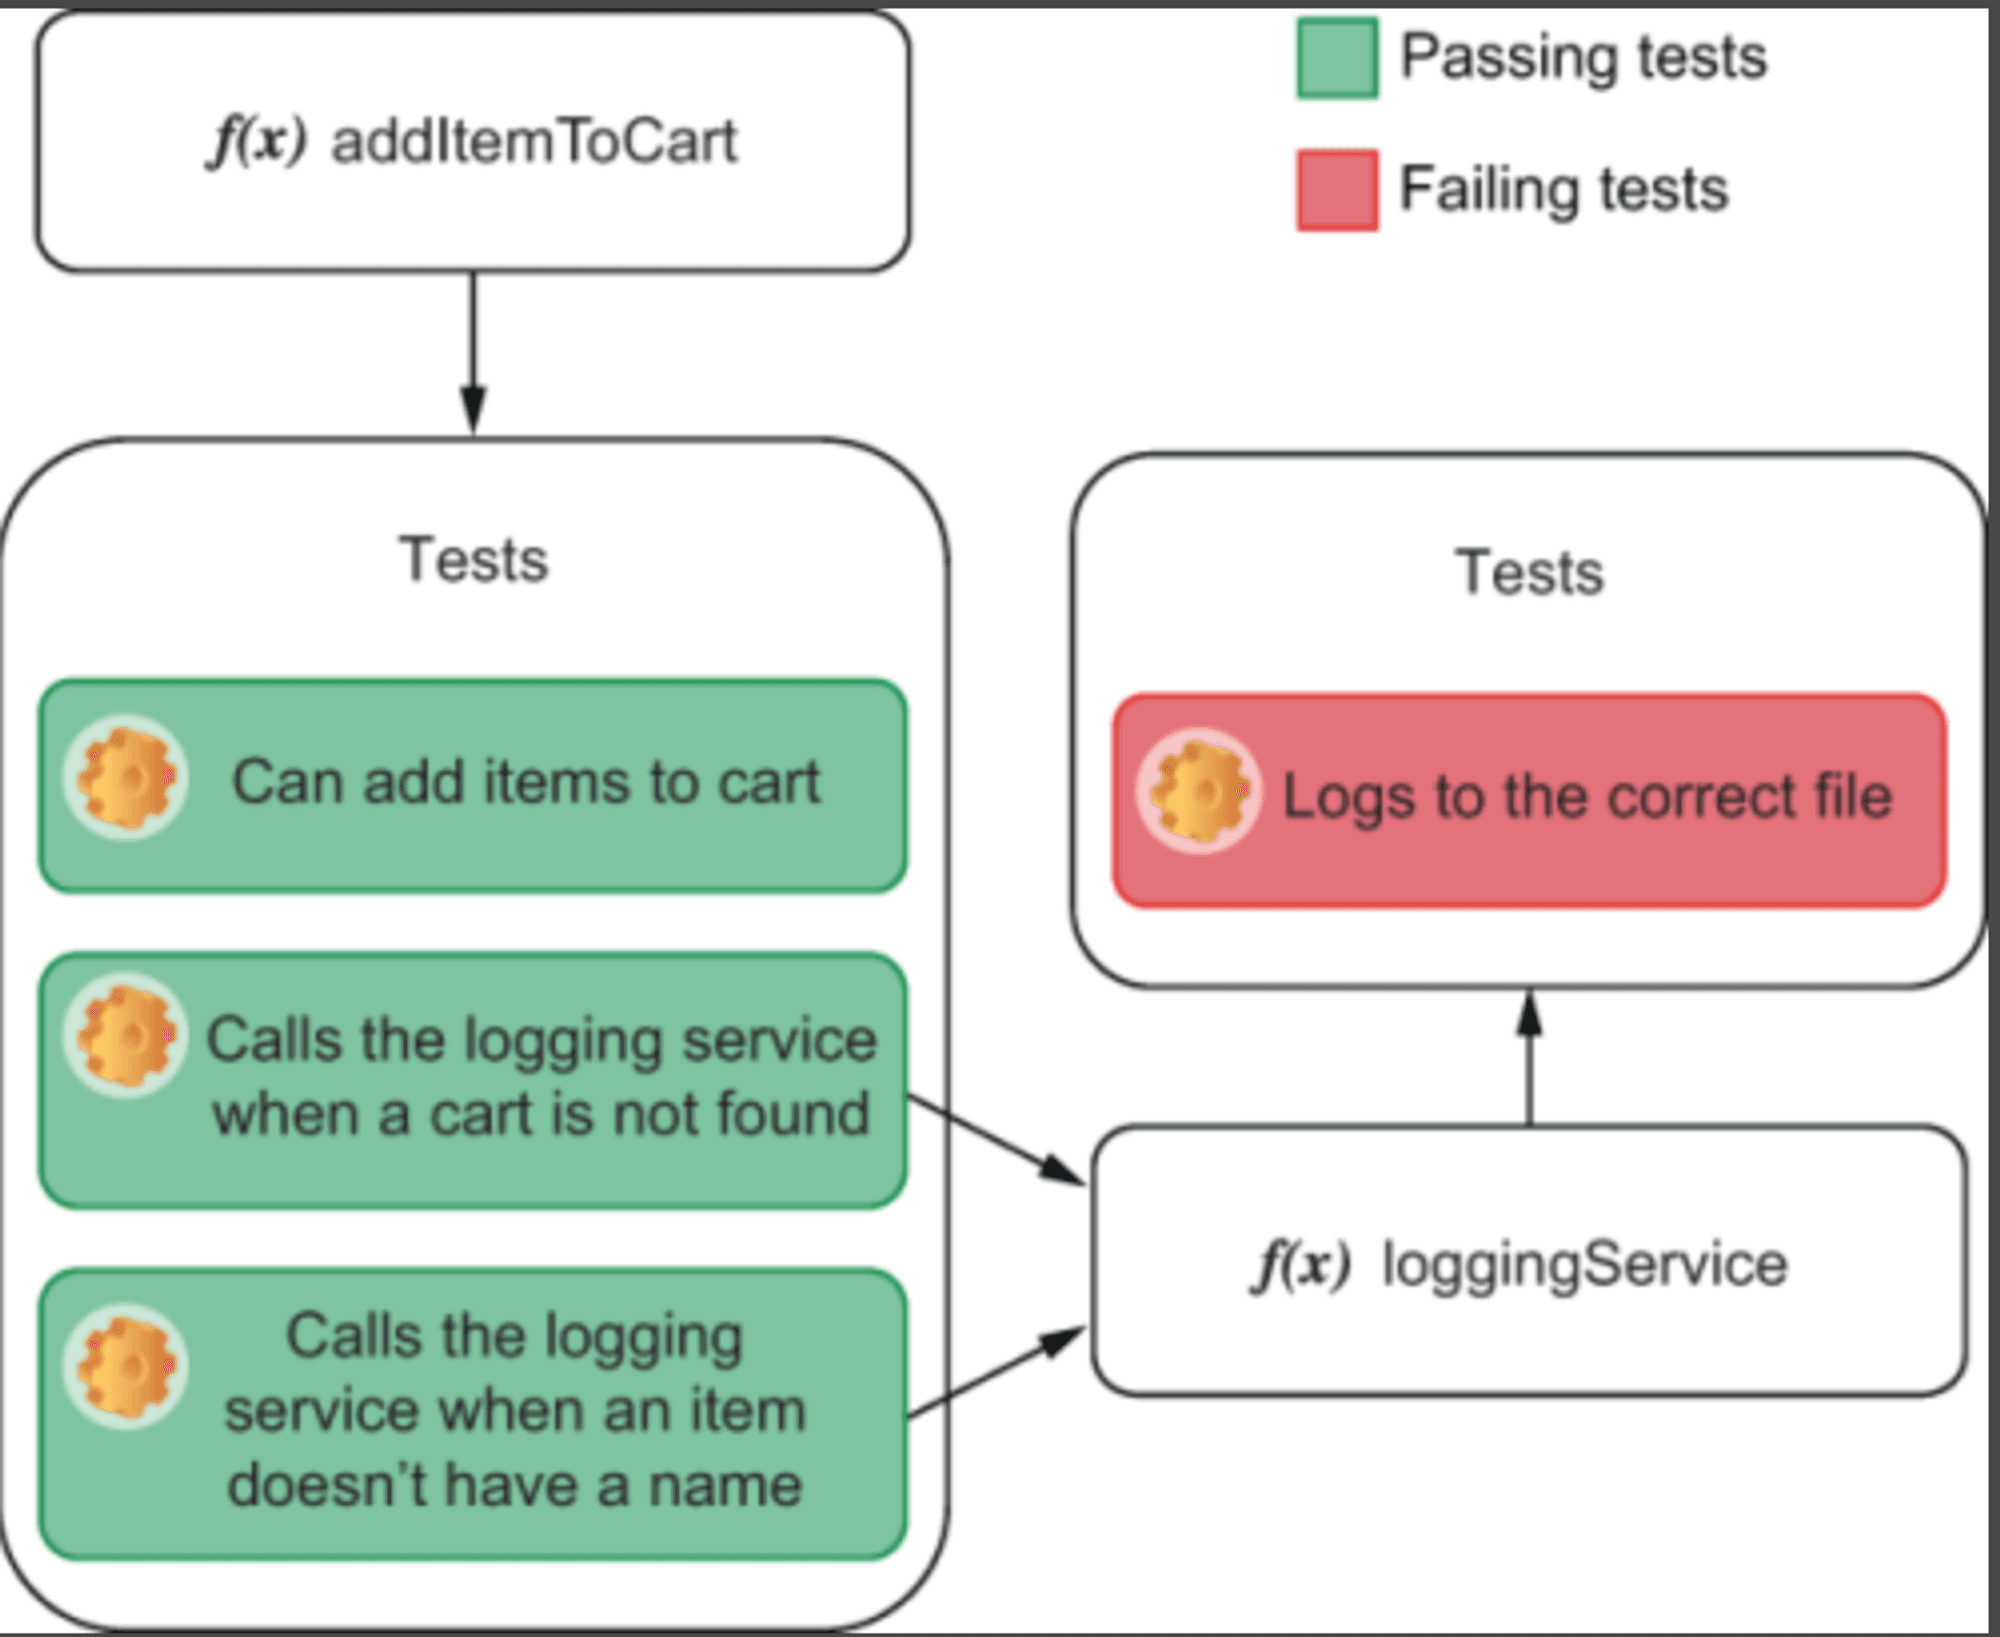 If you change the file to which loggingService writes, its tests will fail. The addItemToCart tests will still pass, as they are doing what you expect: using the logging service. Structuring your tests this way gives you fewer tests to update and more precise feedback about which part of your software doesn't meet the tests' requirements.